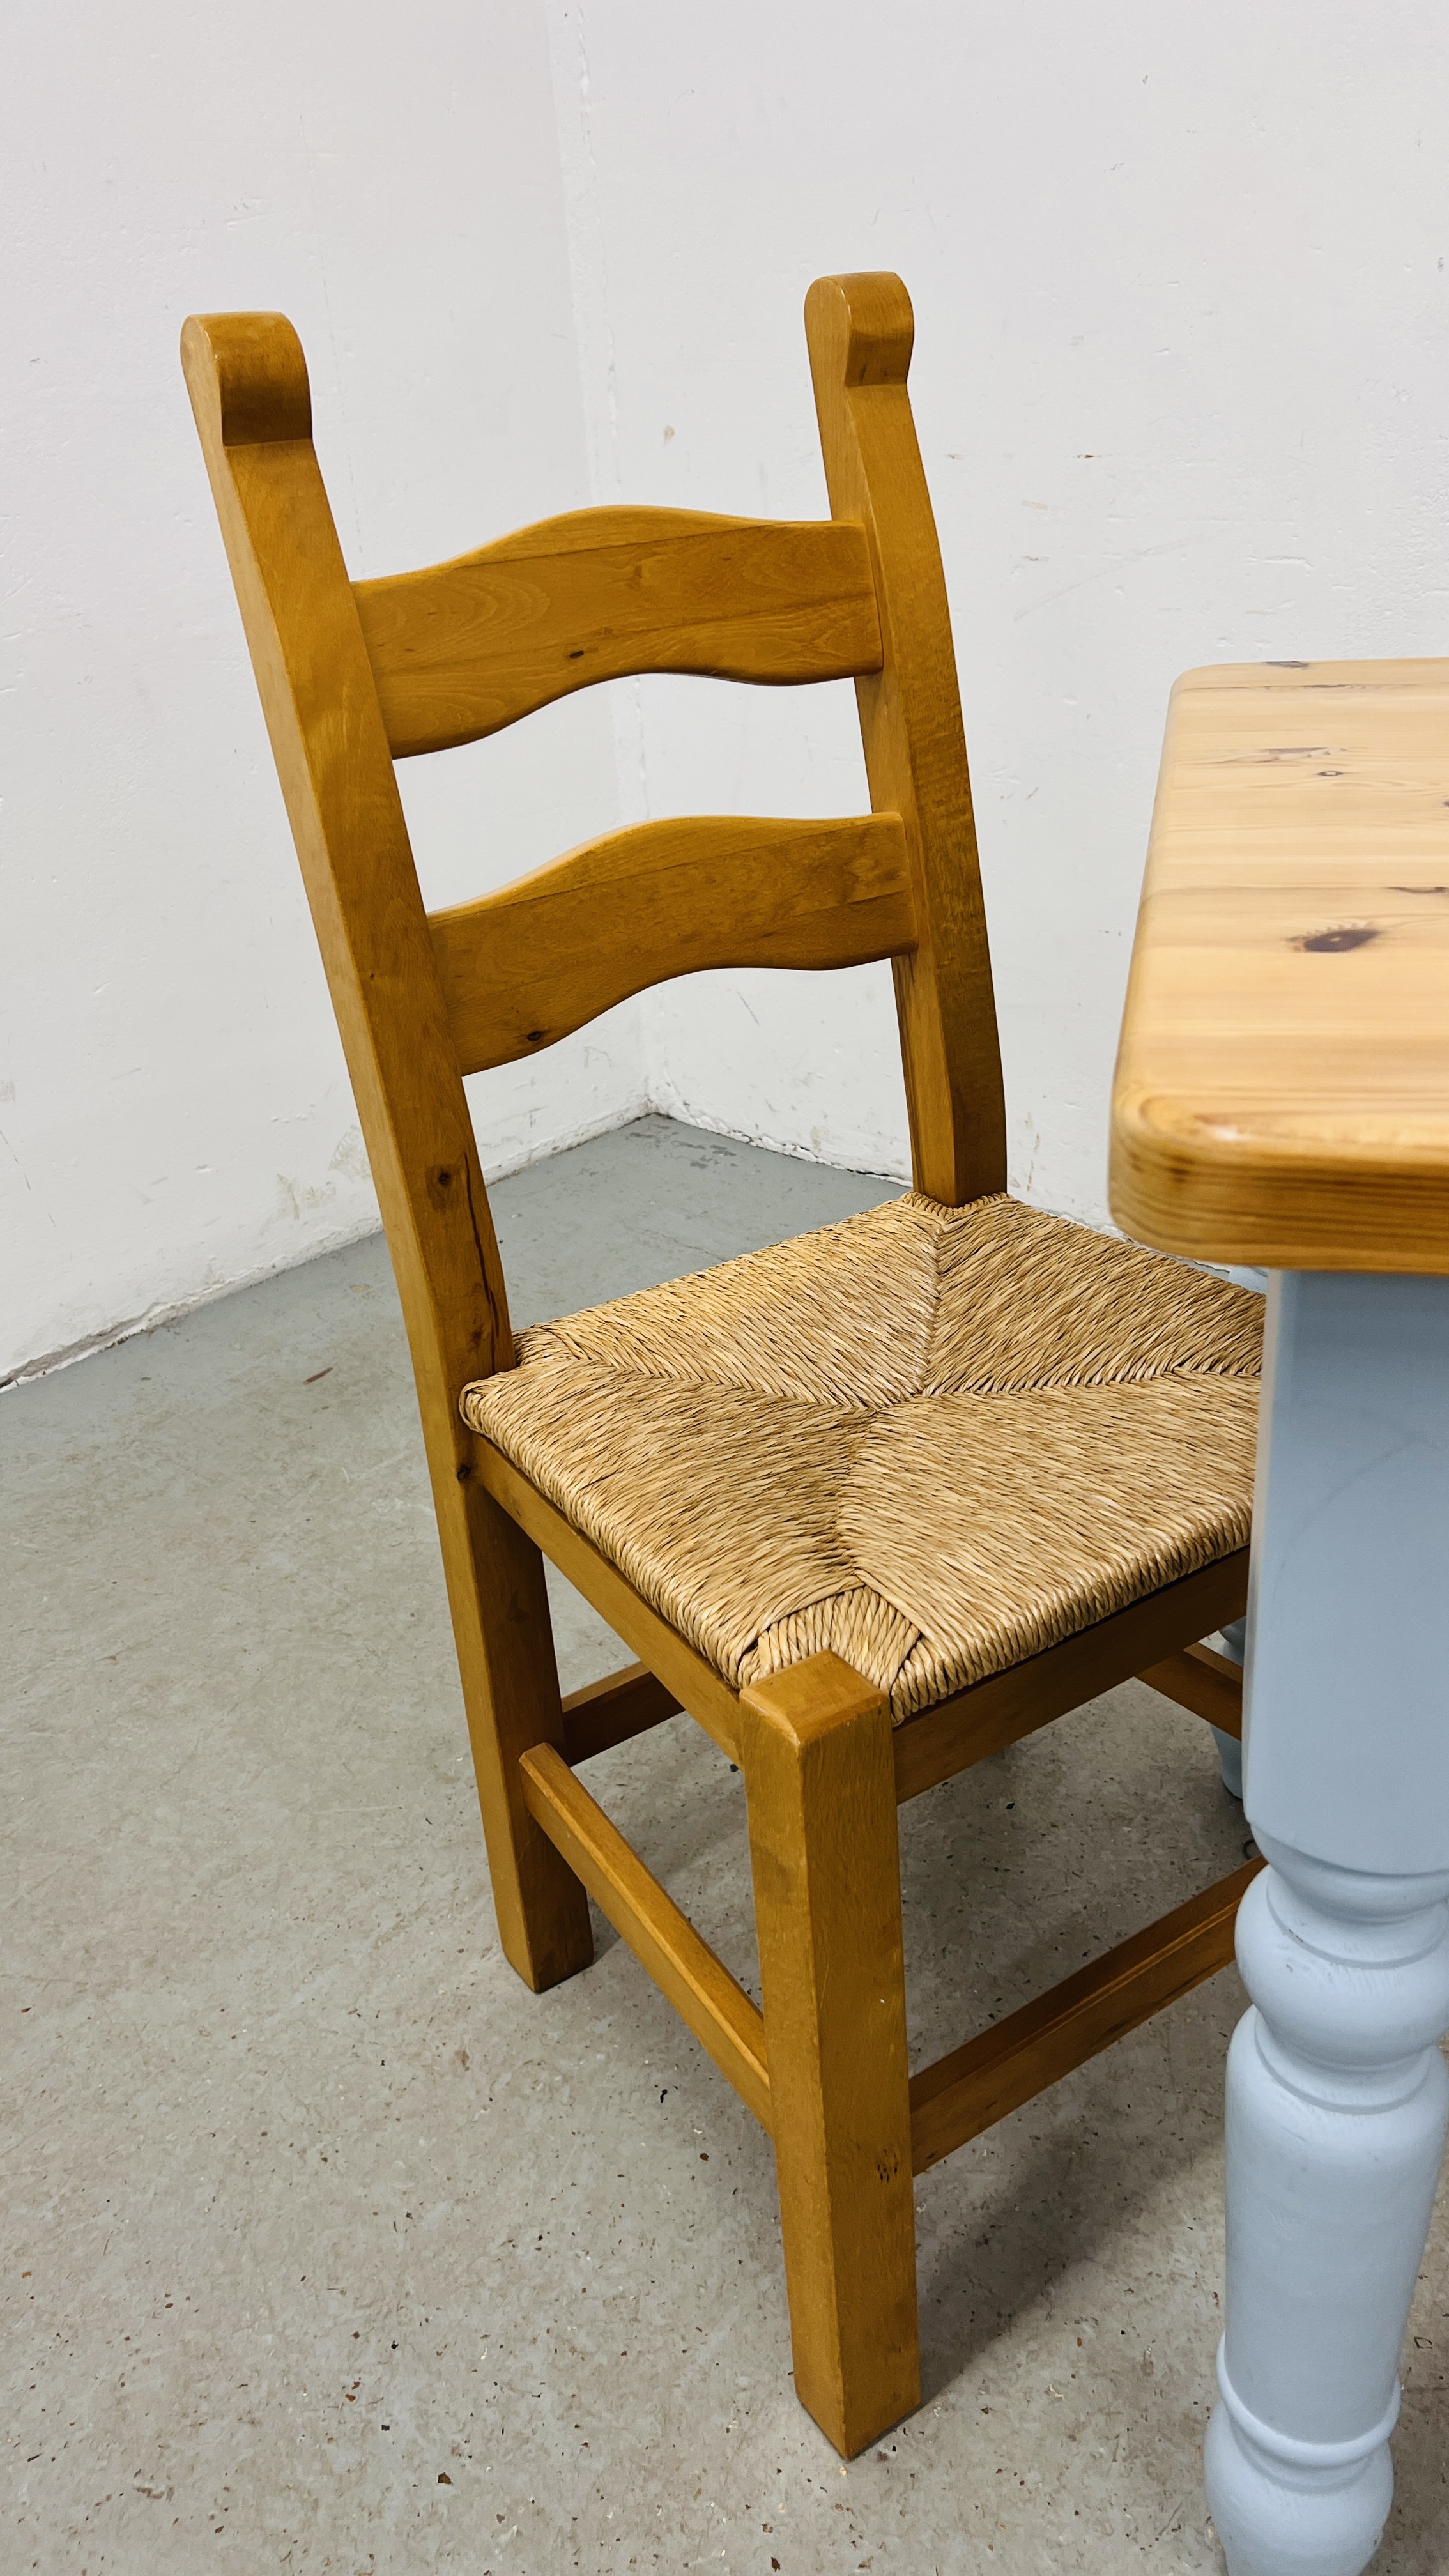 A SOLID PINE BREAKFAST TABLE WITH NATURAL WAXED FINISH TOP AND TWO SOLID BEECHWOOD DINING CHAIRS - Image 6 of 8